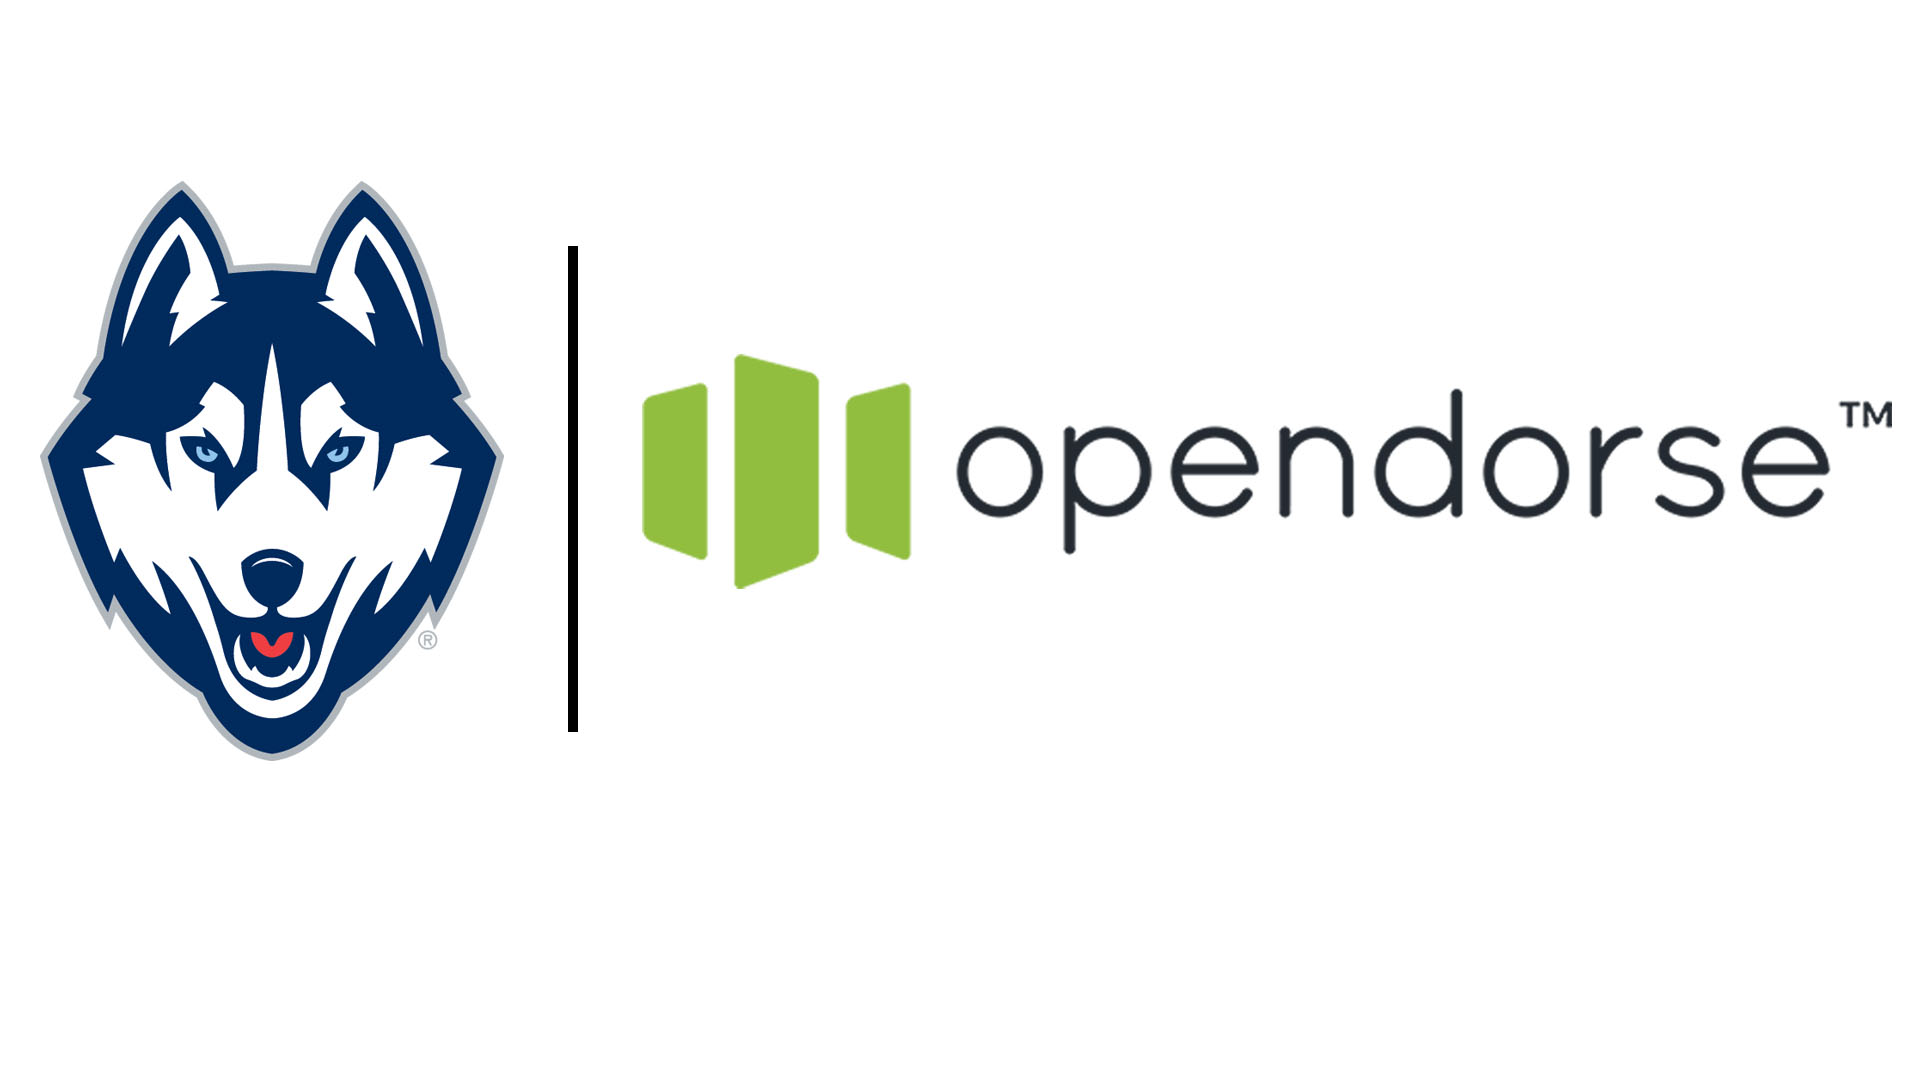 UConn and Opendorse